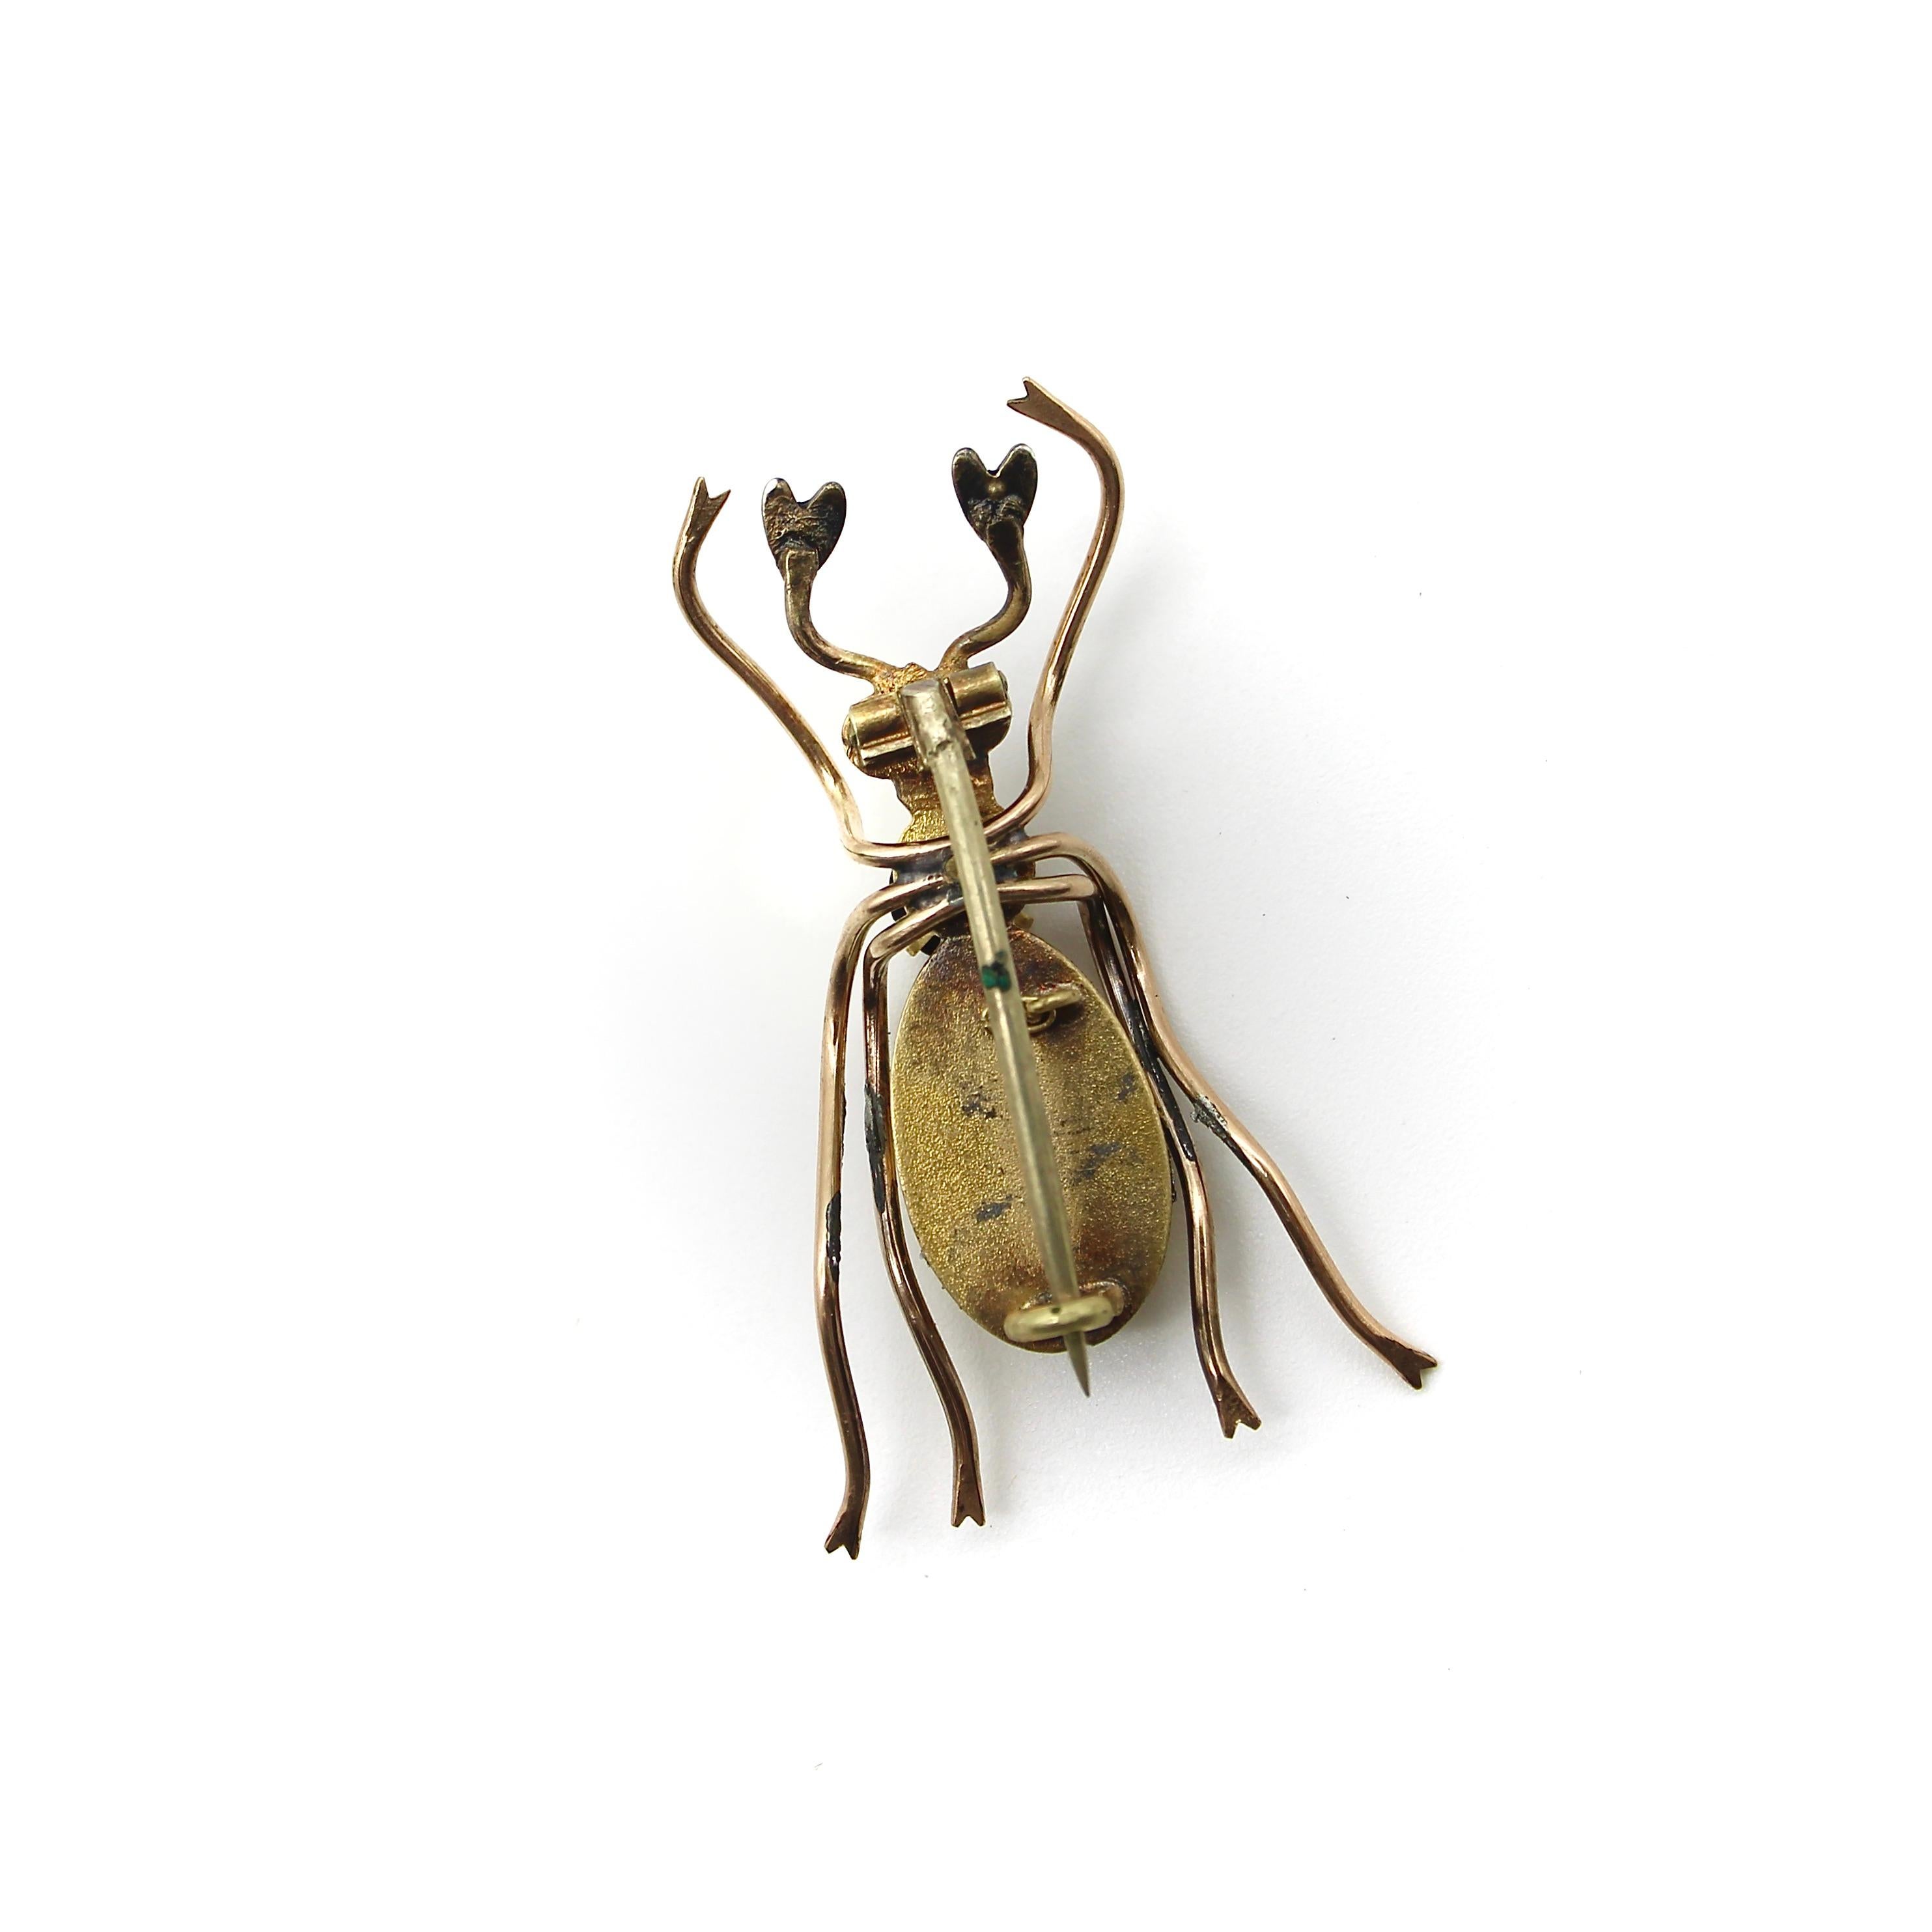 This Victorian brooch is emblematic of the naturalism found in jewelry from the late 19th century. Bugs were a popular motif, and the beetle was a particularly important symbol, representing renewal and transformation. The quintessential Victorian